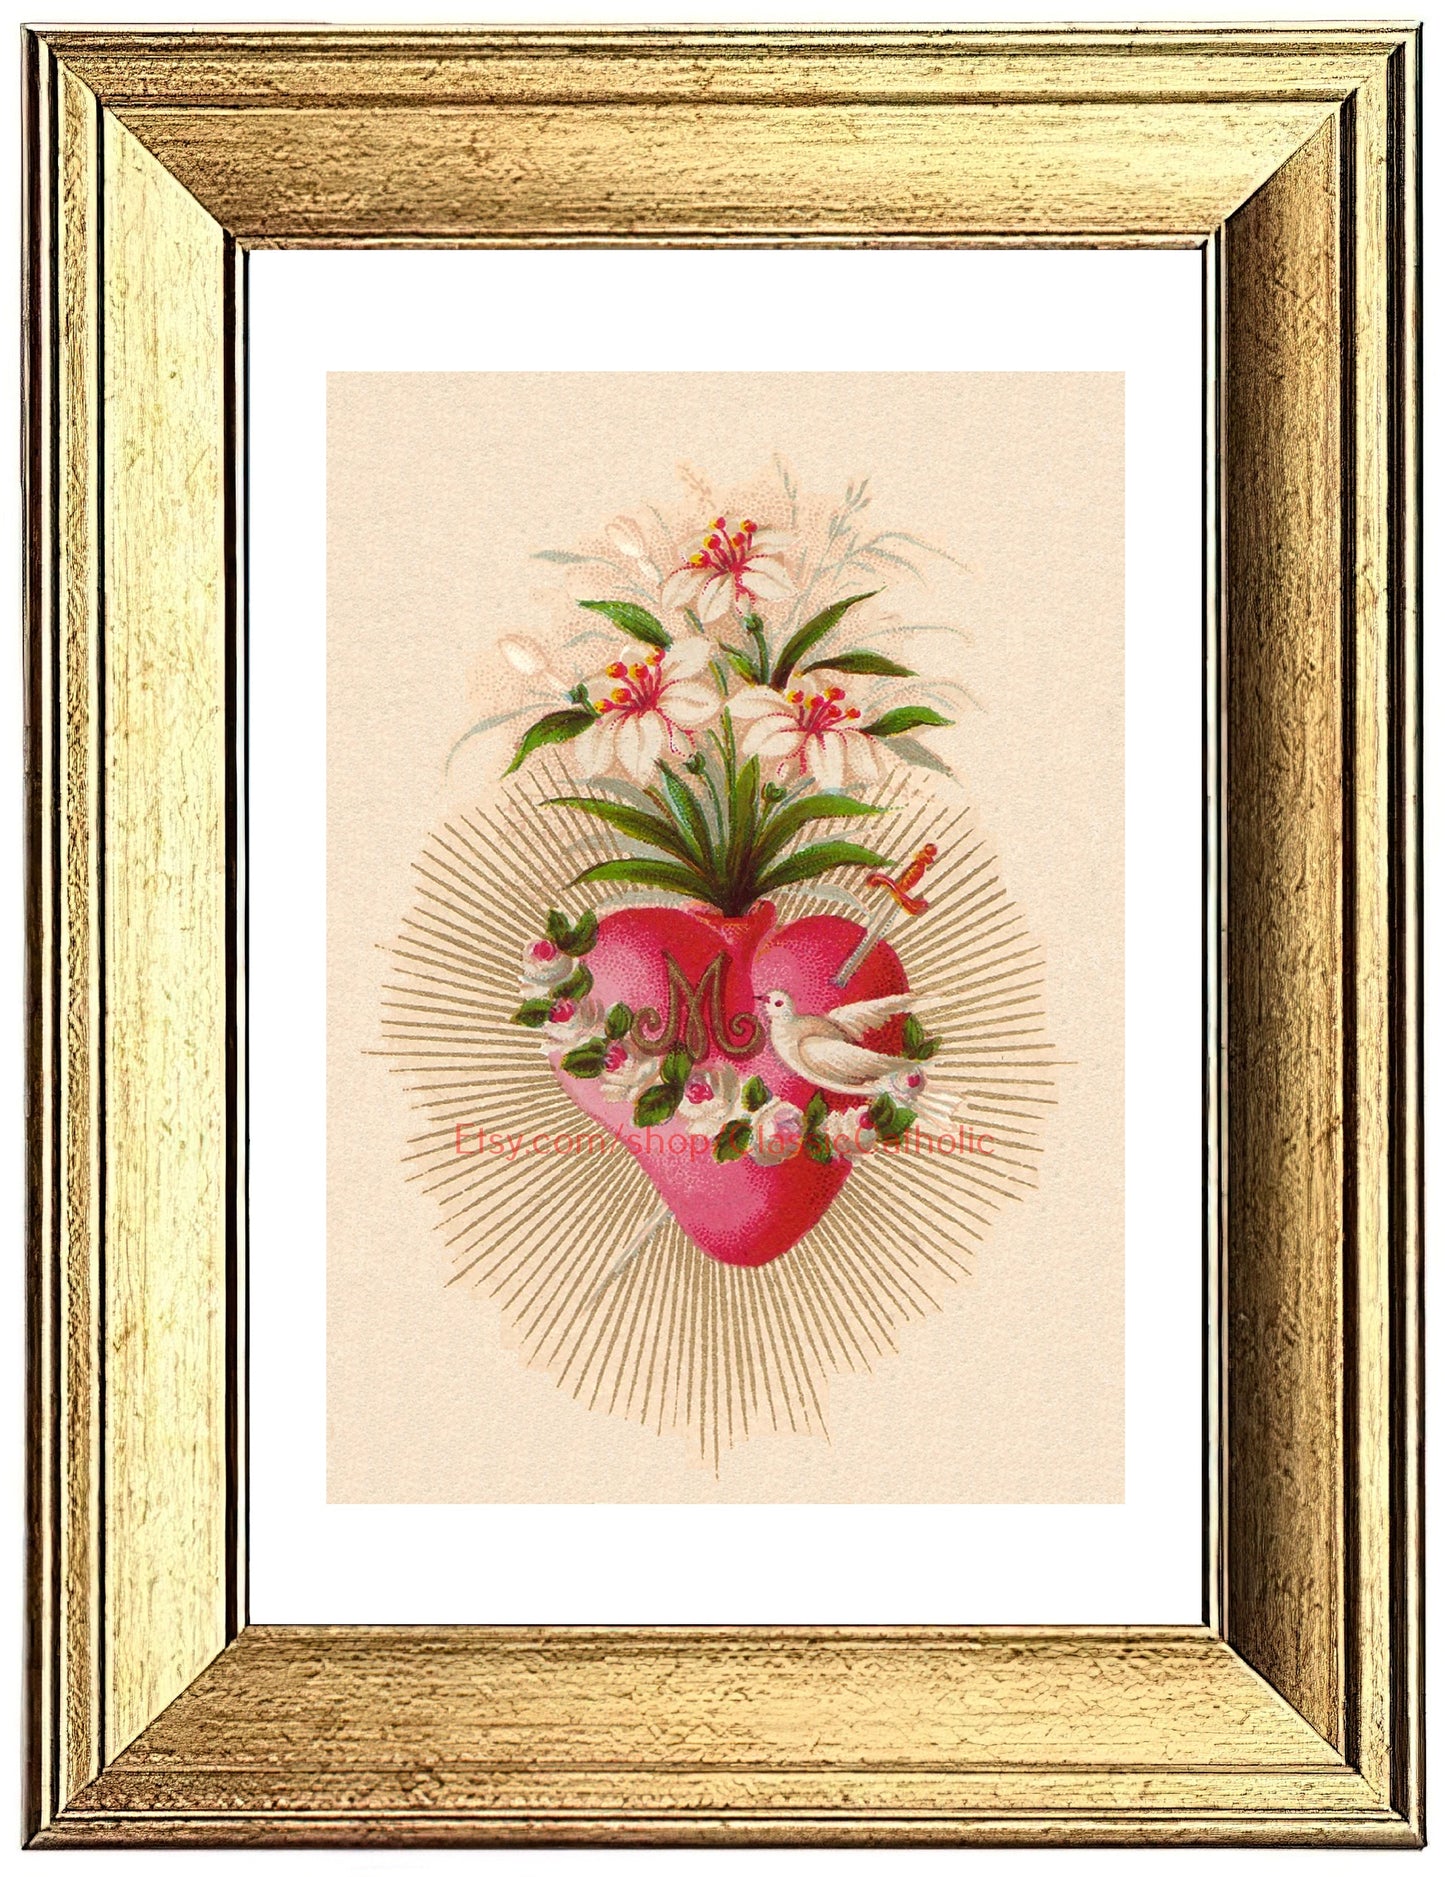 Immaculate Heart of Mary – based on a Vintage Holy Card – Catholic Art Print – Archival Quality